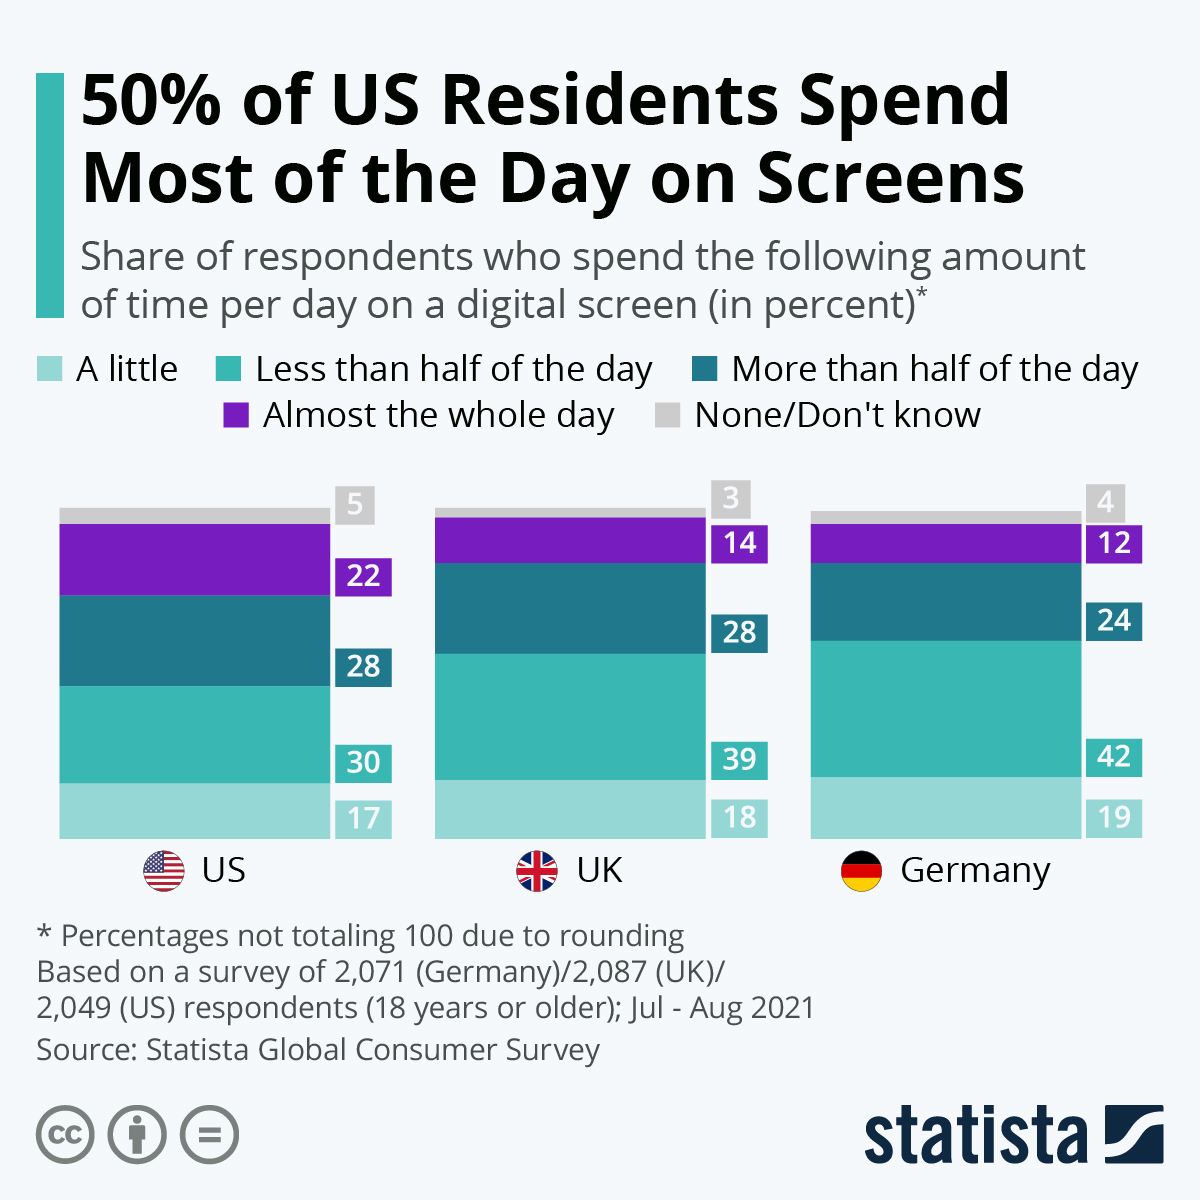 50% of US Residents Spend Most of the Day on Screens